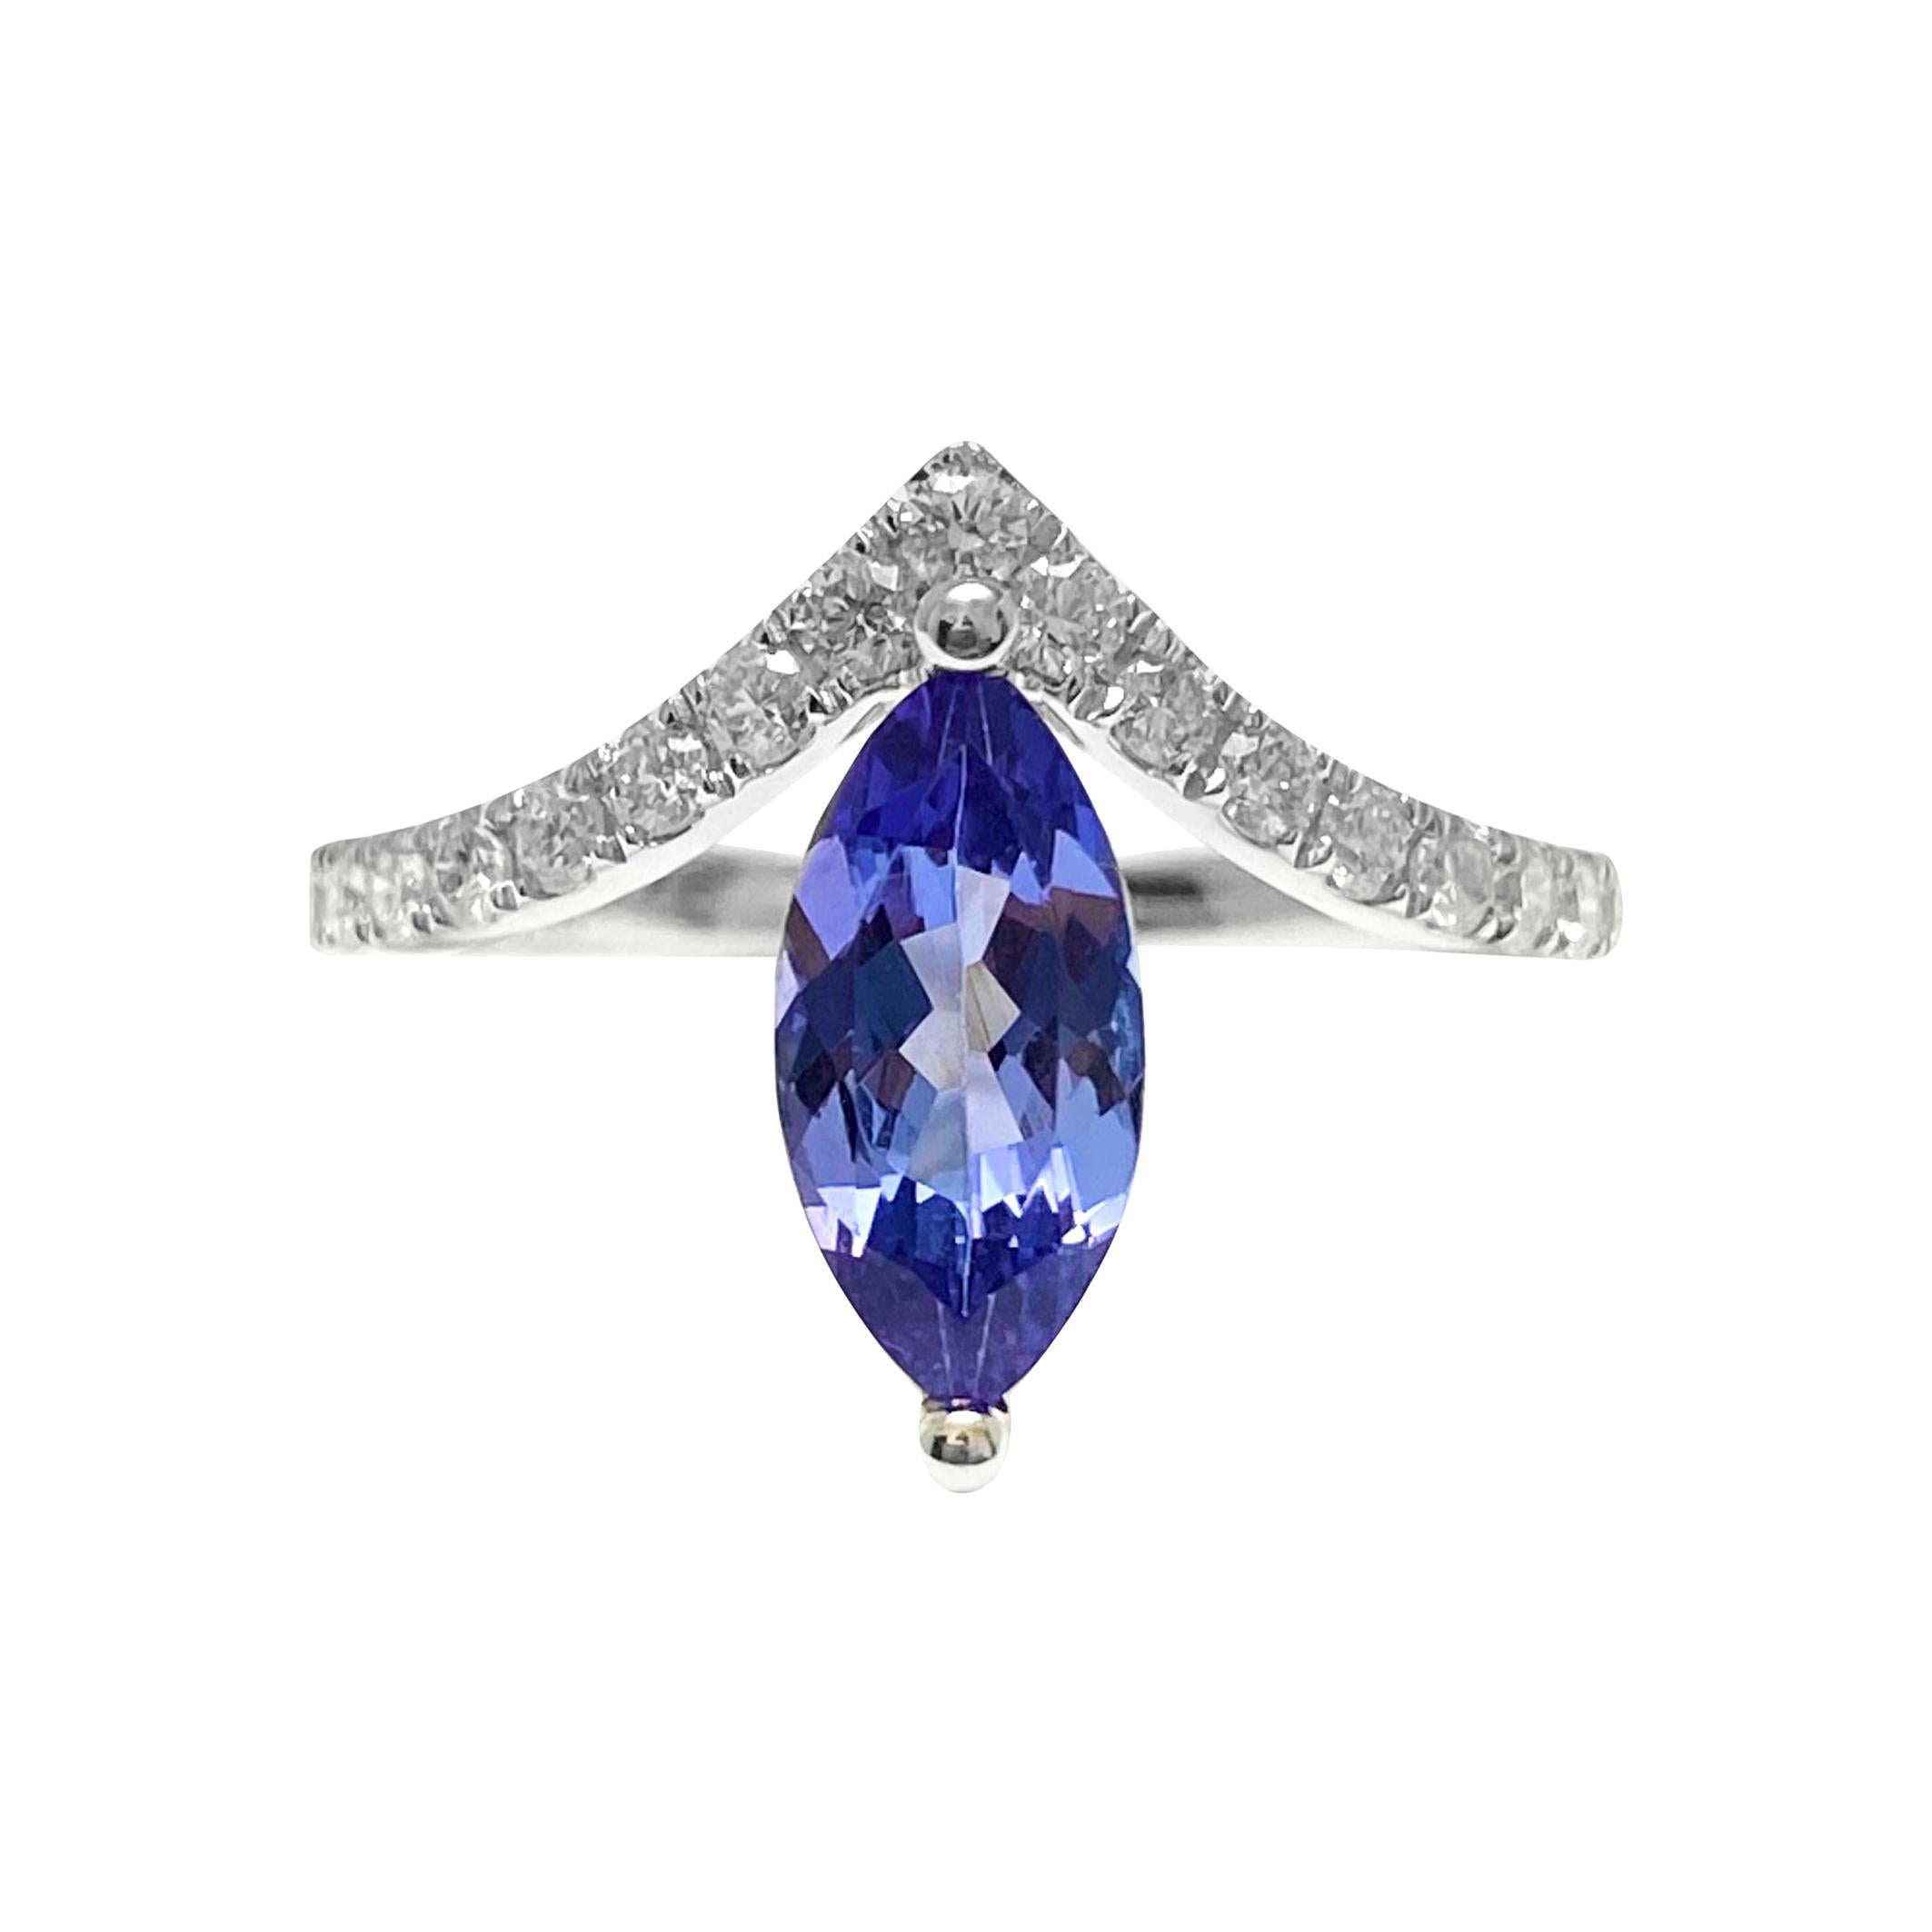 1.21 Carat Marquise-Cut Violet Tanzanite and Diamond 18k White Gold "V" Ring For Sale